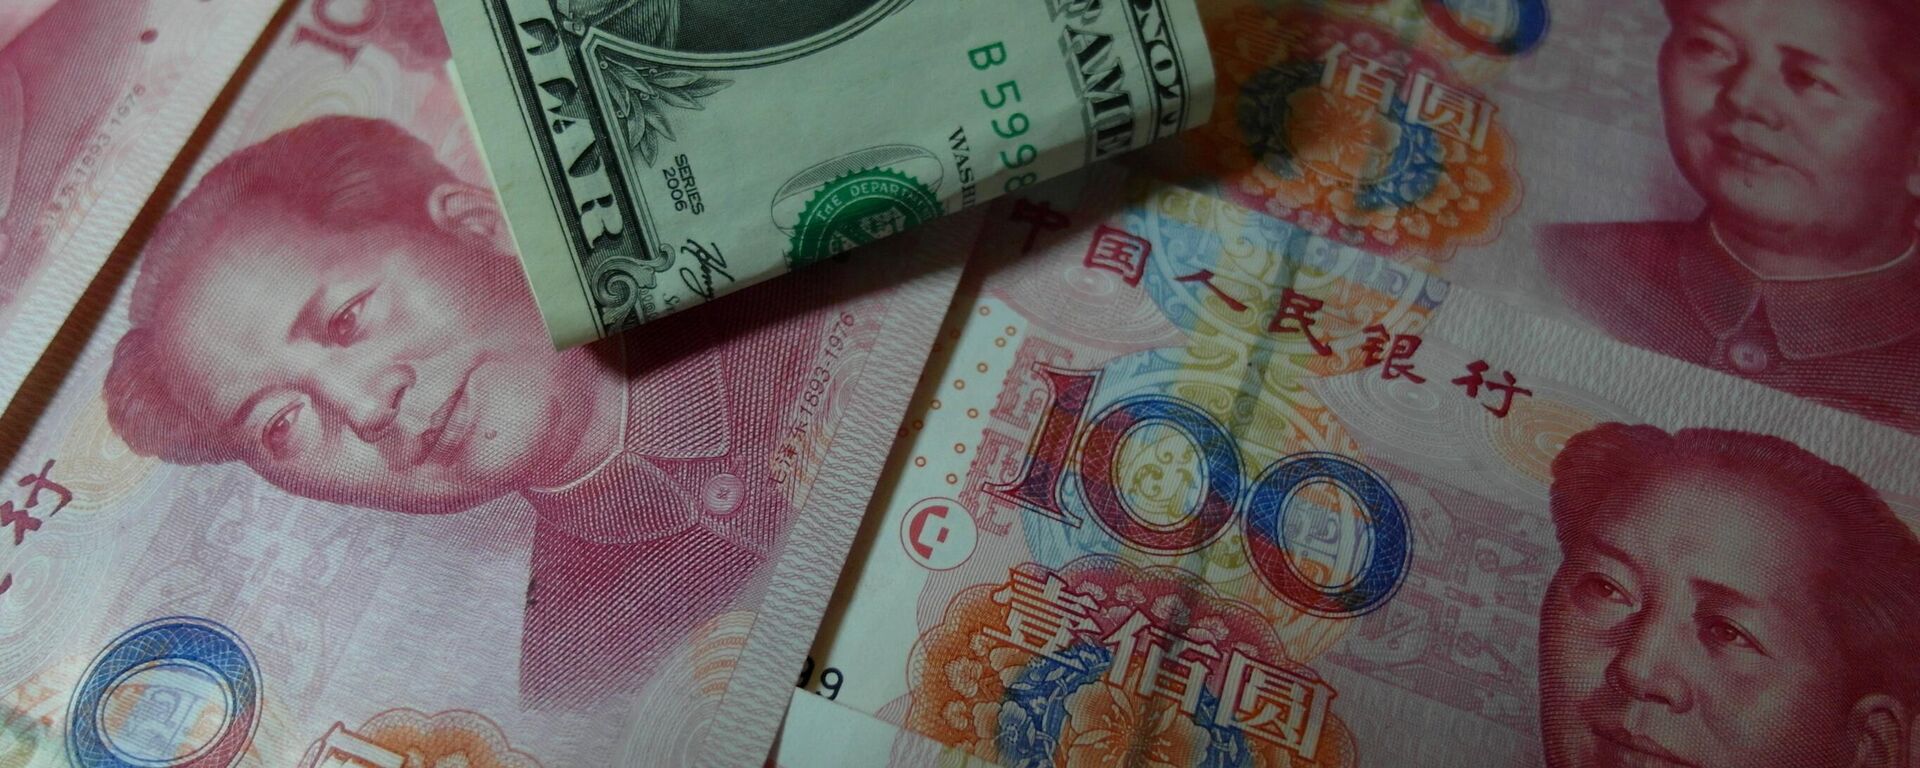 Yuan banknotes and US dollars are seen on a table in Yichang, central China's Hubei province on August 14, 2015 - Sputnik International, 1920, 23.05.2023